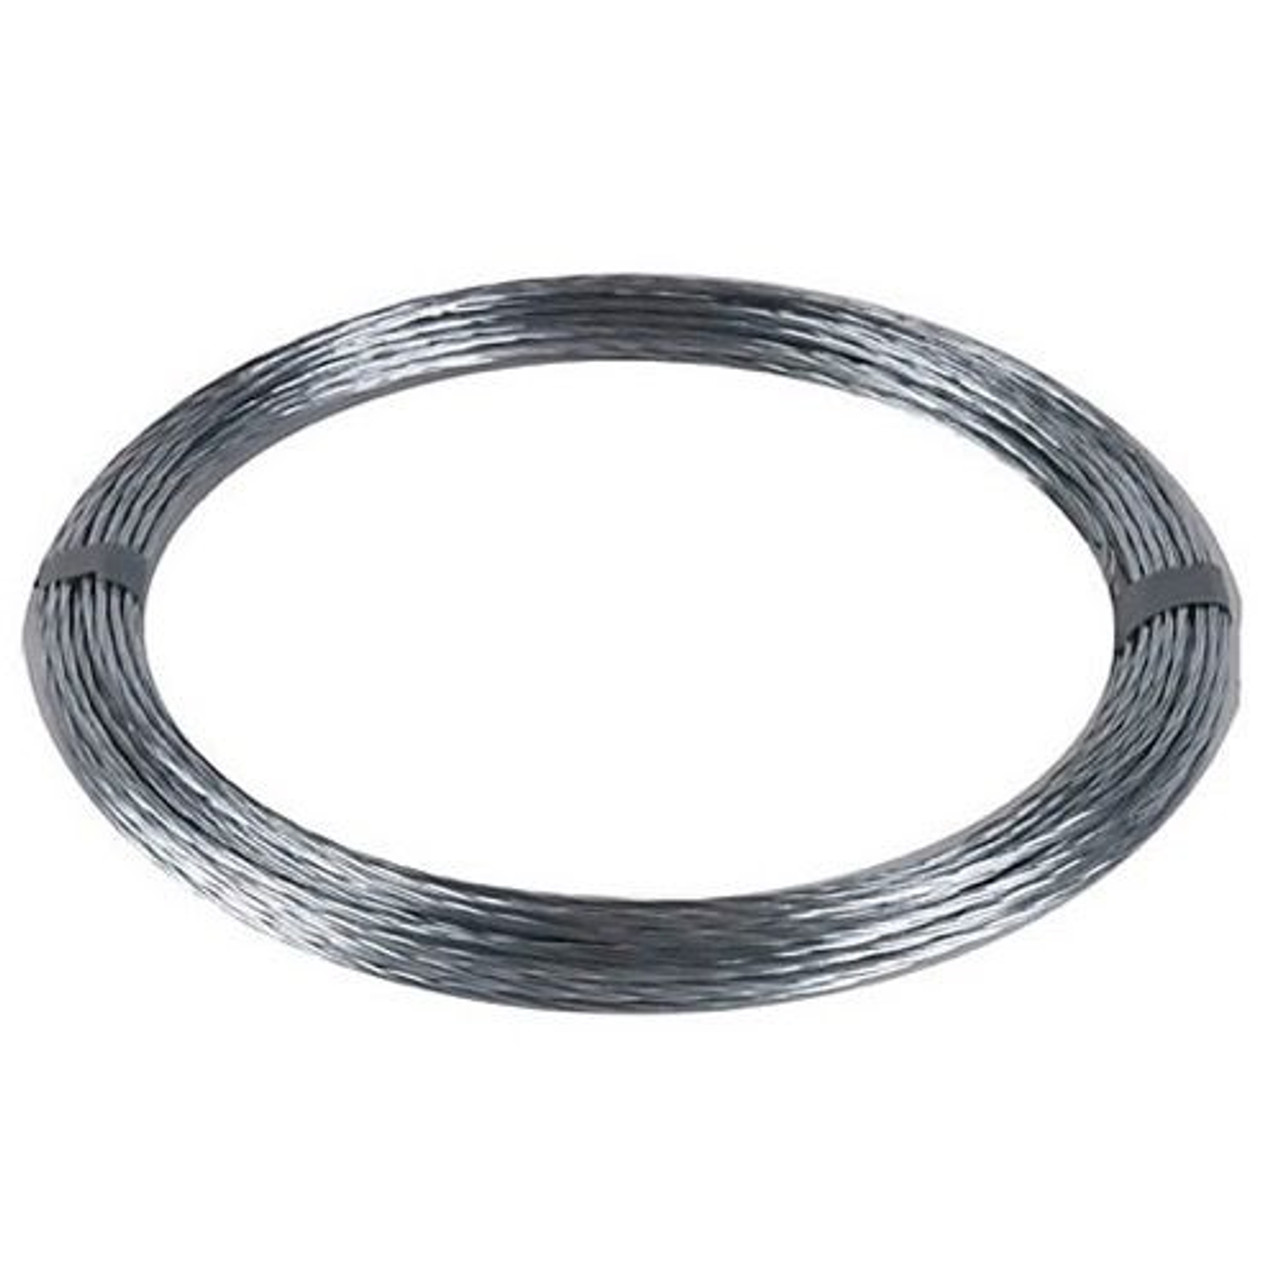 Eagle 50' Ft Steel Guy Wire Twisted 20 AWG 4 Strand Antenna Mast Cable Support 50' FT 20 Ga 4 Strand Off-Air Mast Pipe Roof Mount Cable, Part # Gemini G50